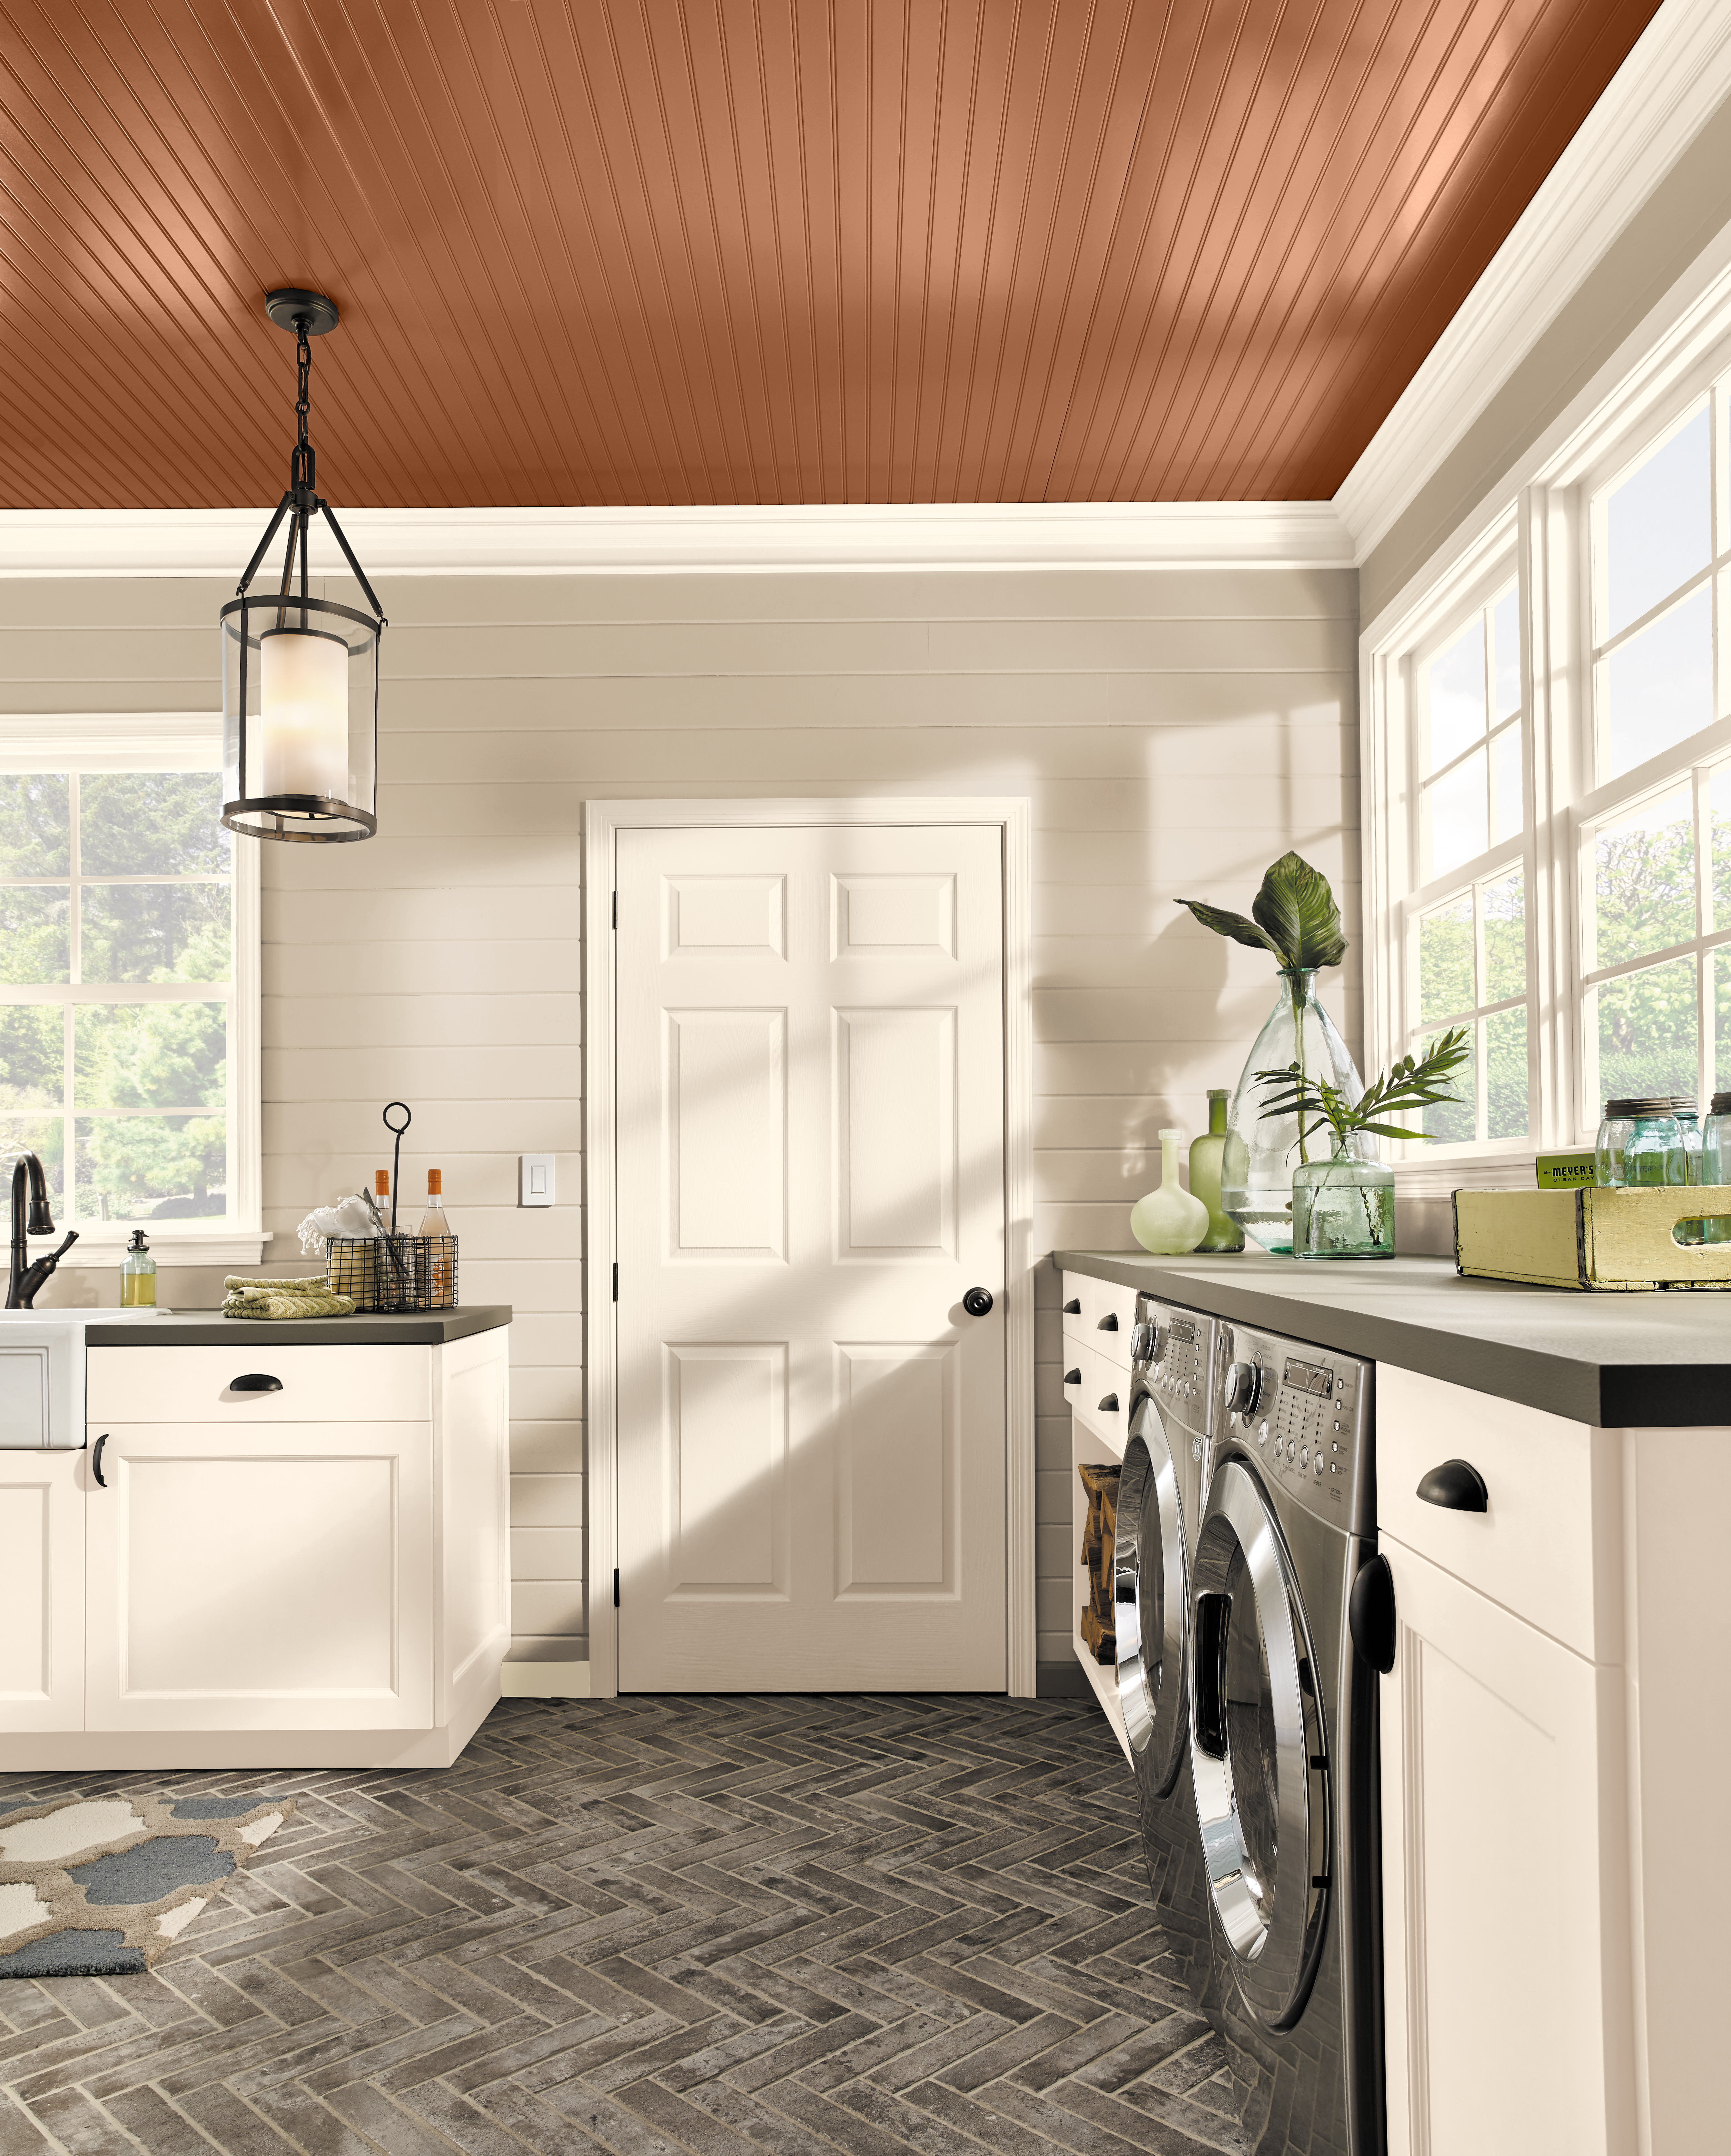 A laundry room painted in a light neutral colors which make the overall room feel expansive and bright.  The ceiling painted color is a mid-to-dark warm tone called Maple Glaze. 